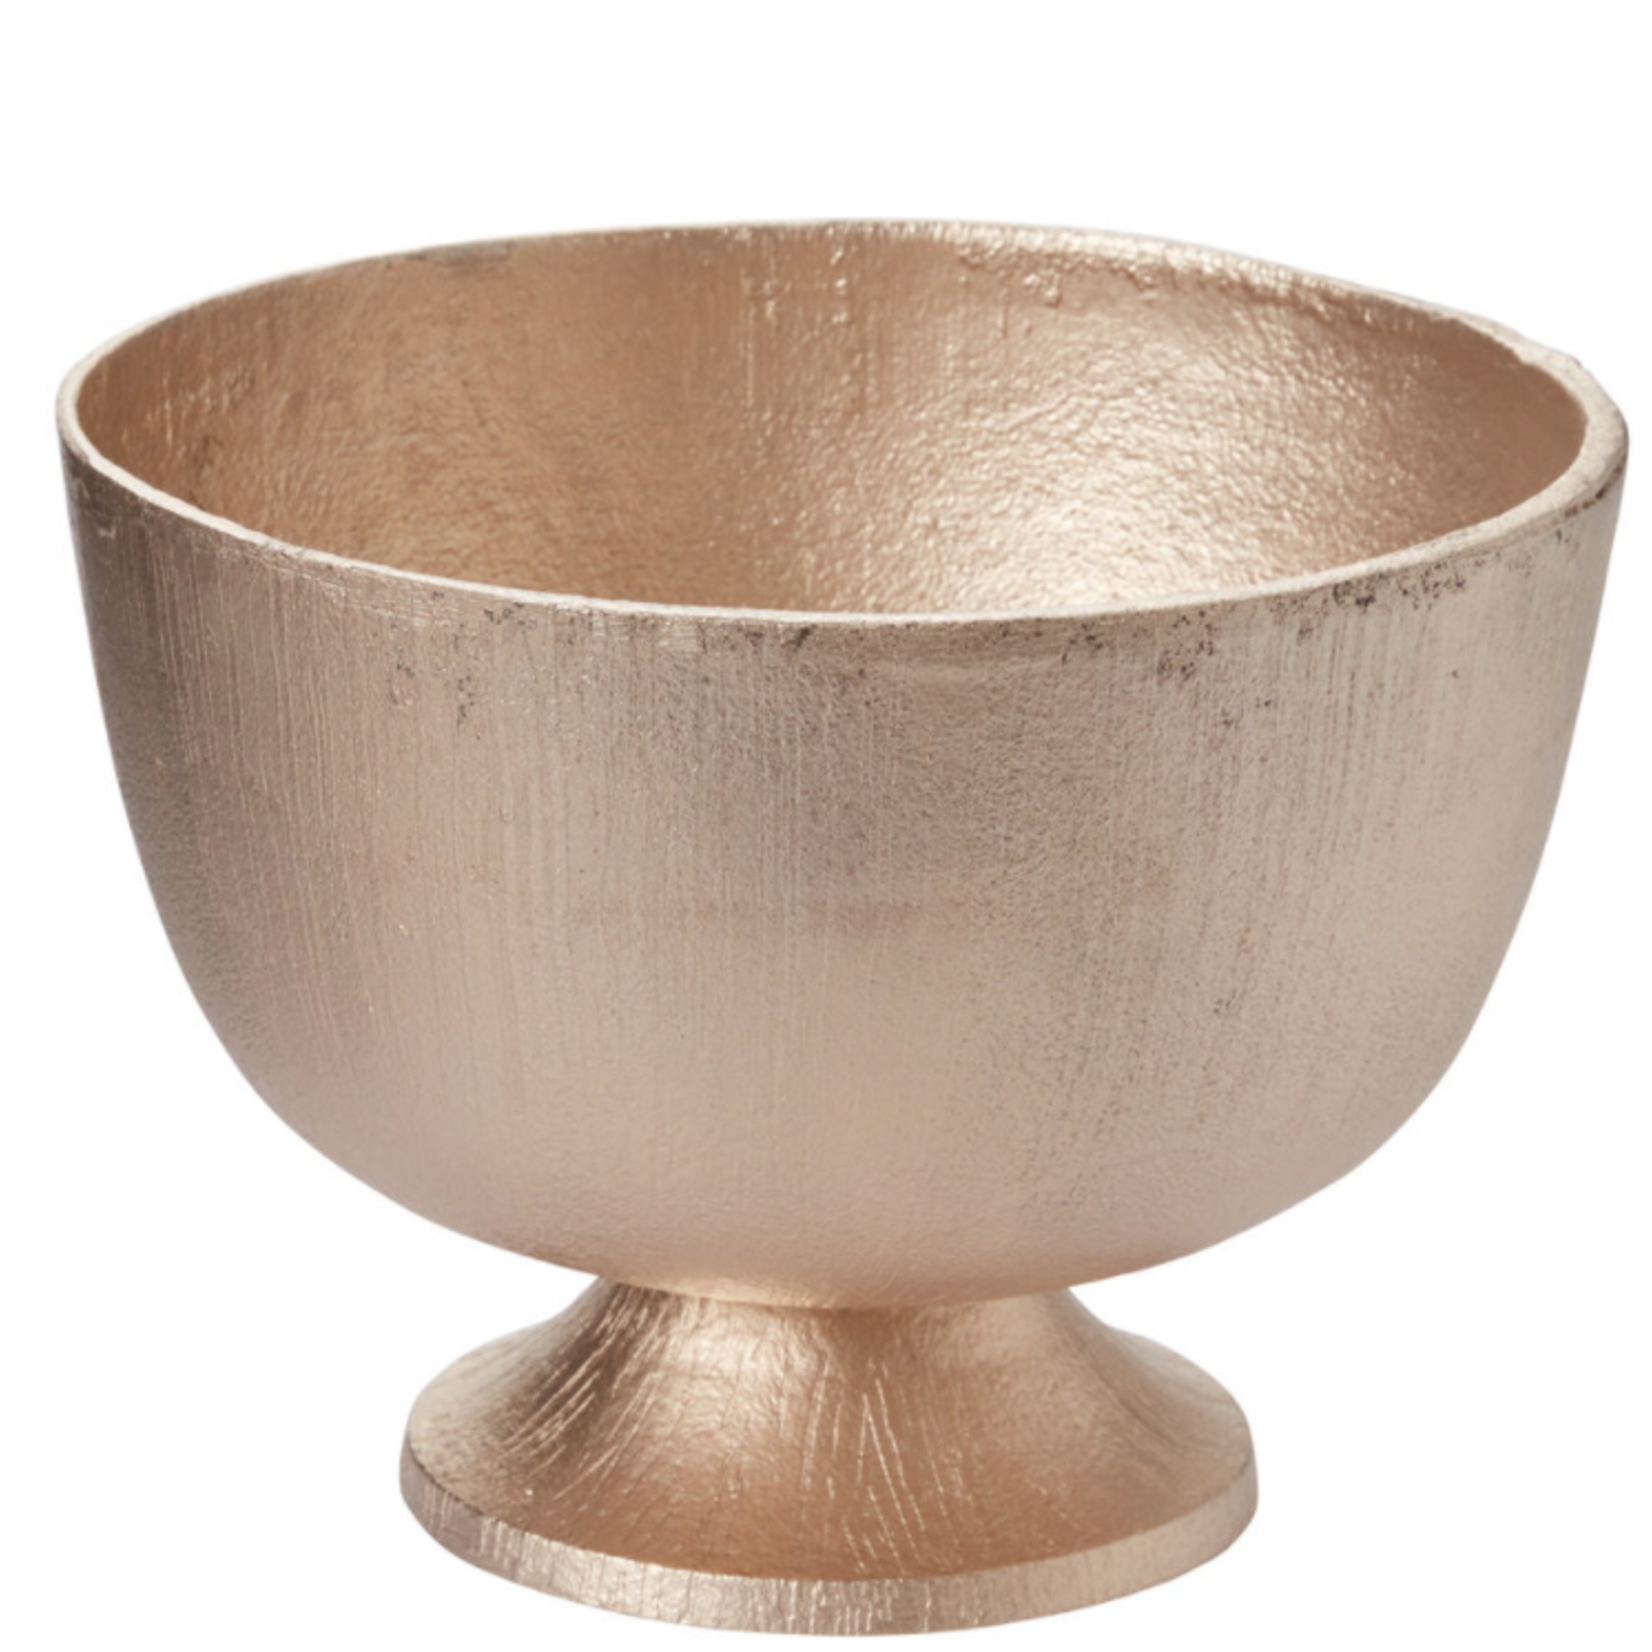 7"H X 9.5" CHAMPAGNE METAL CALEDONIA COMPOTE